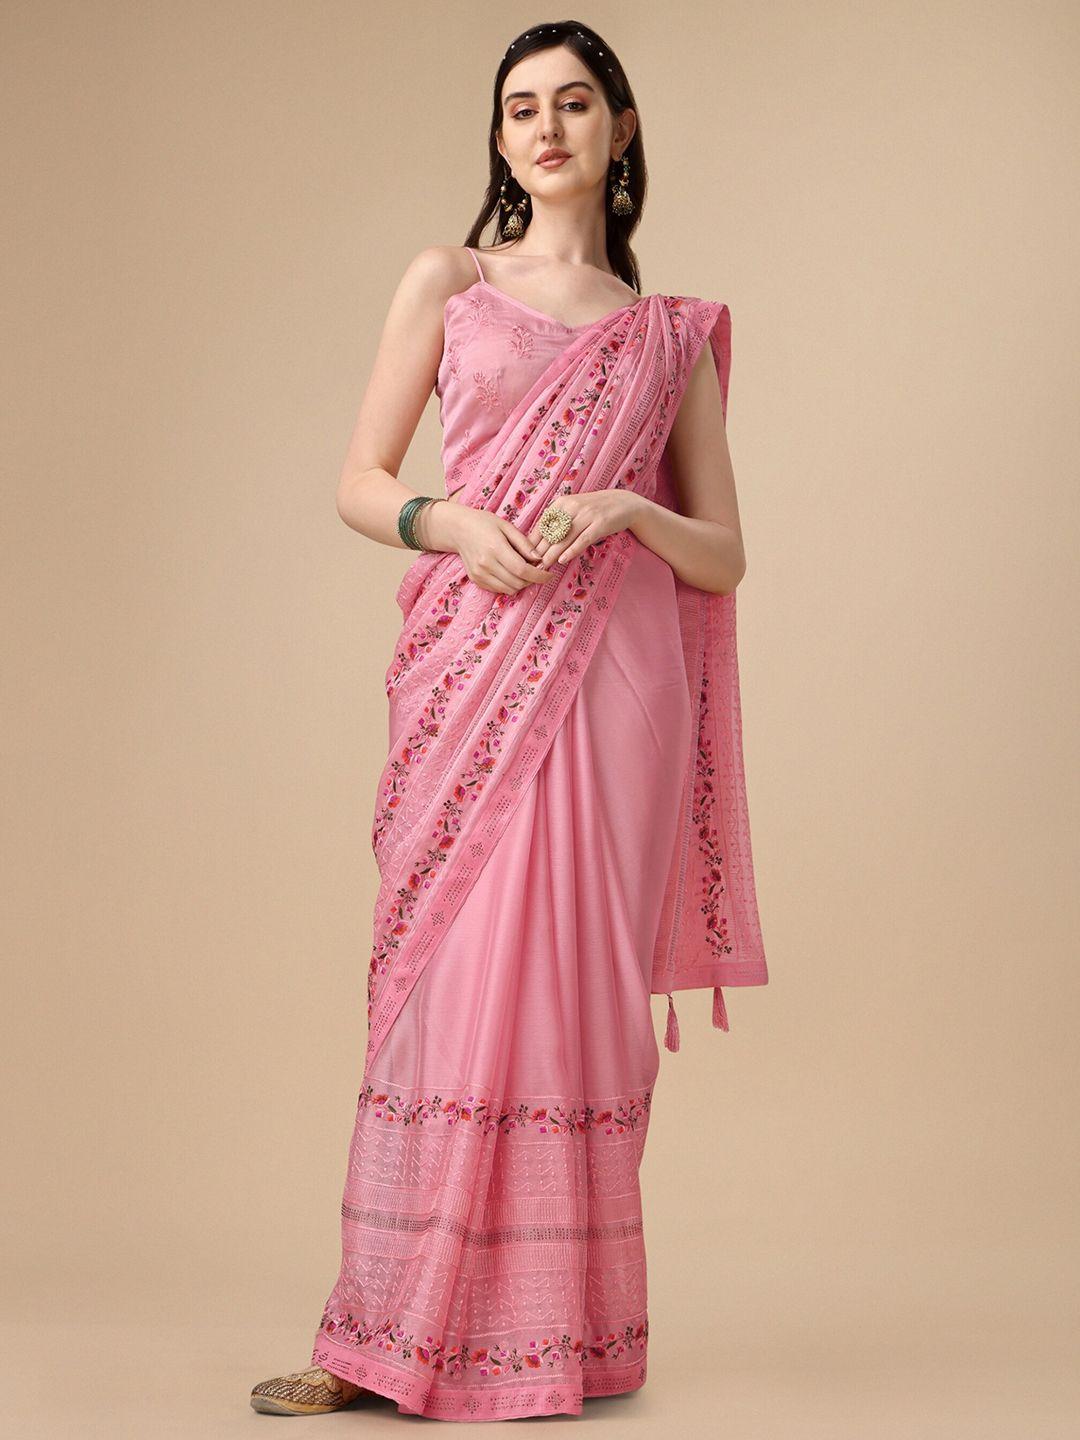 KALINI Floral Beads & Stones Embroidered Pure Chiffon Saree